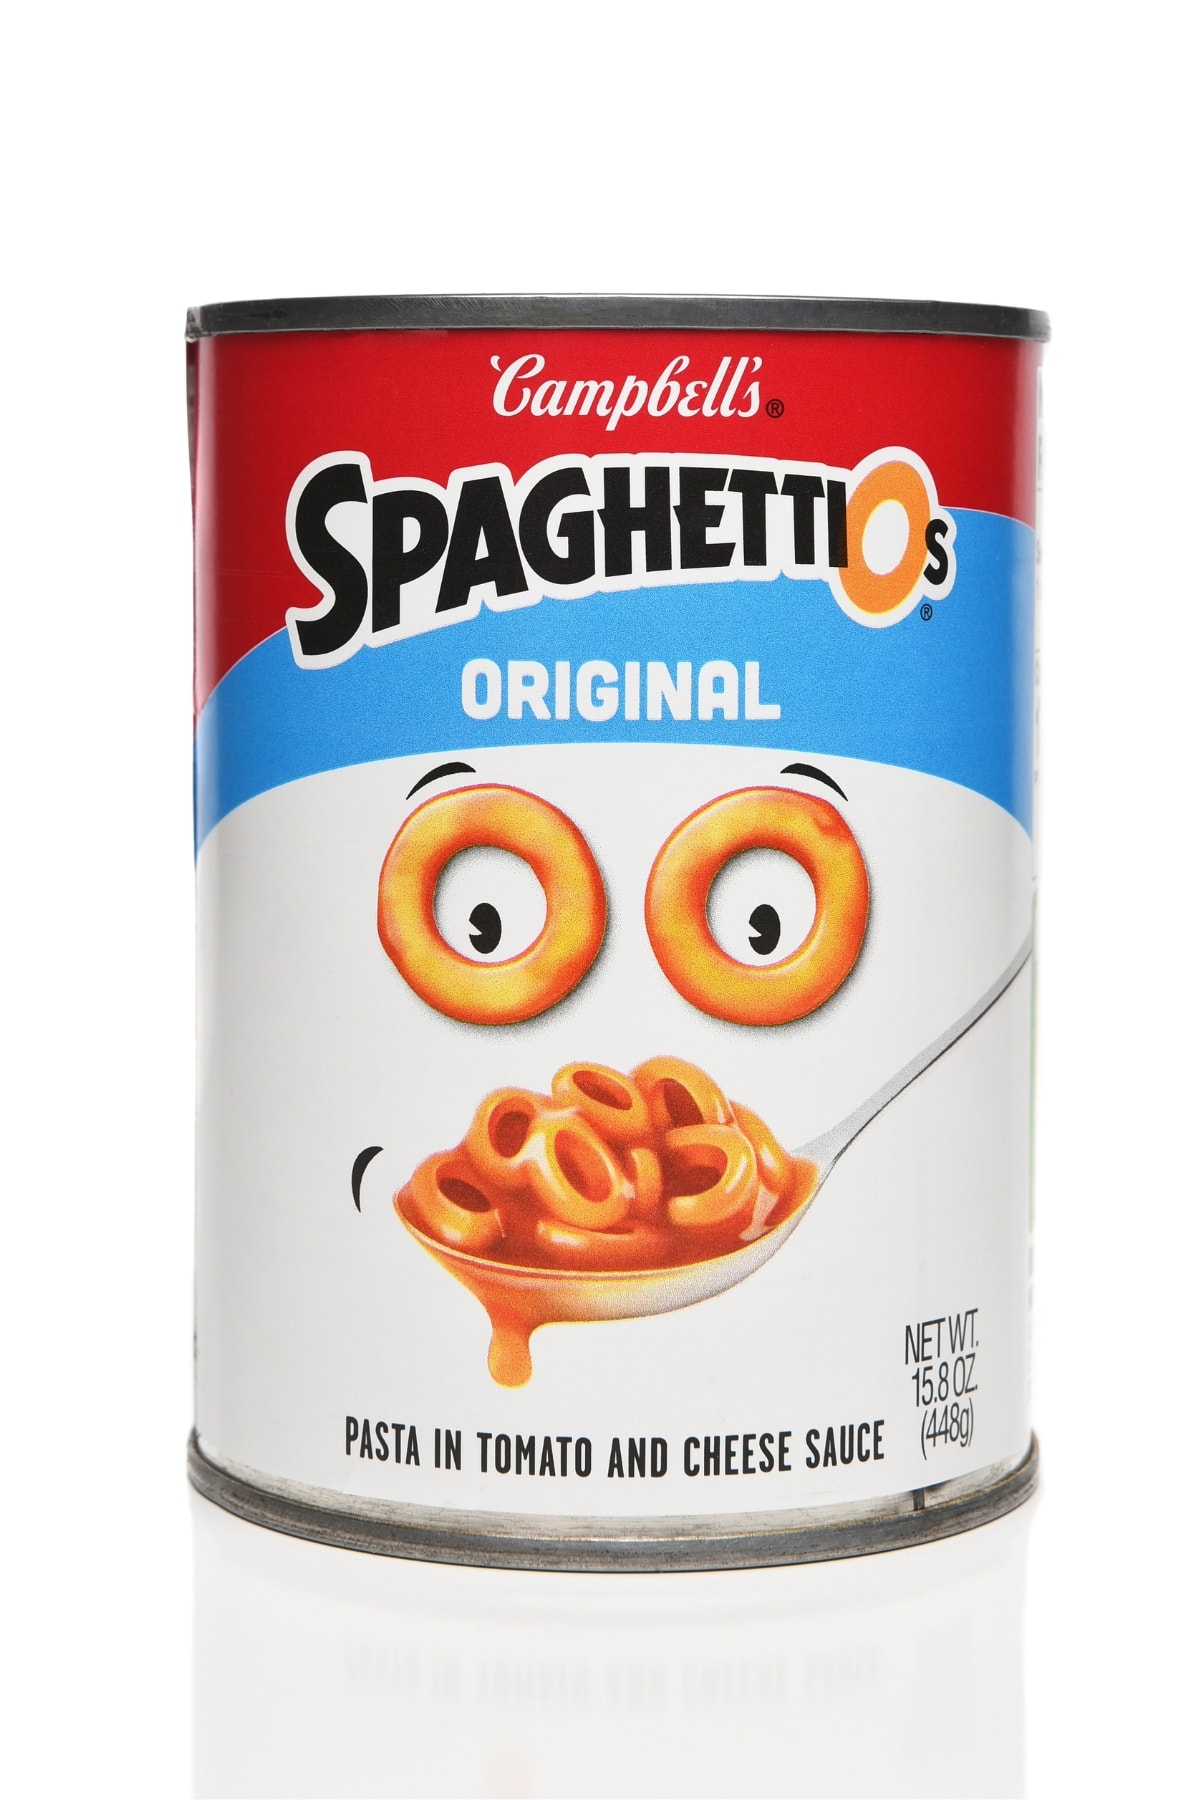 A Can of Spaghettios with Pasta in Tomato and Cheese Sauce